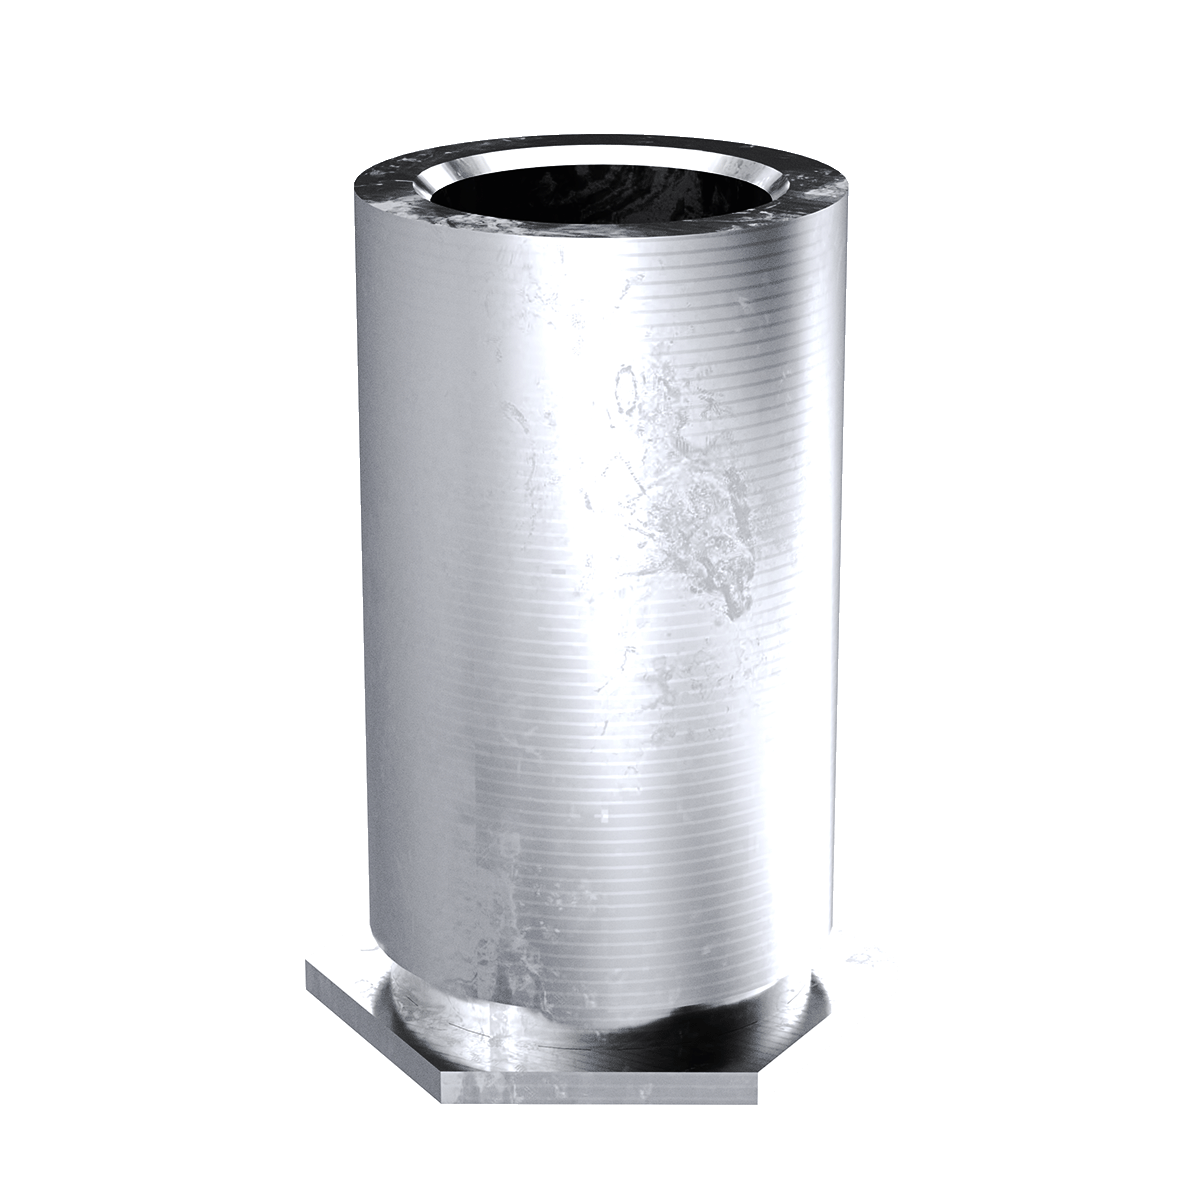 Self-Clinching Standoff, Through Unthreaded, 300 Series Stainless Steel, Passivated, 0.169 x 0.562, 100 Pack